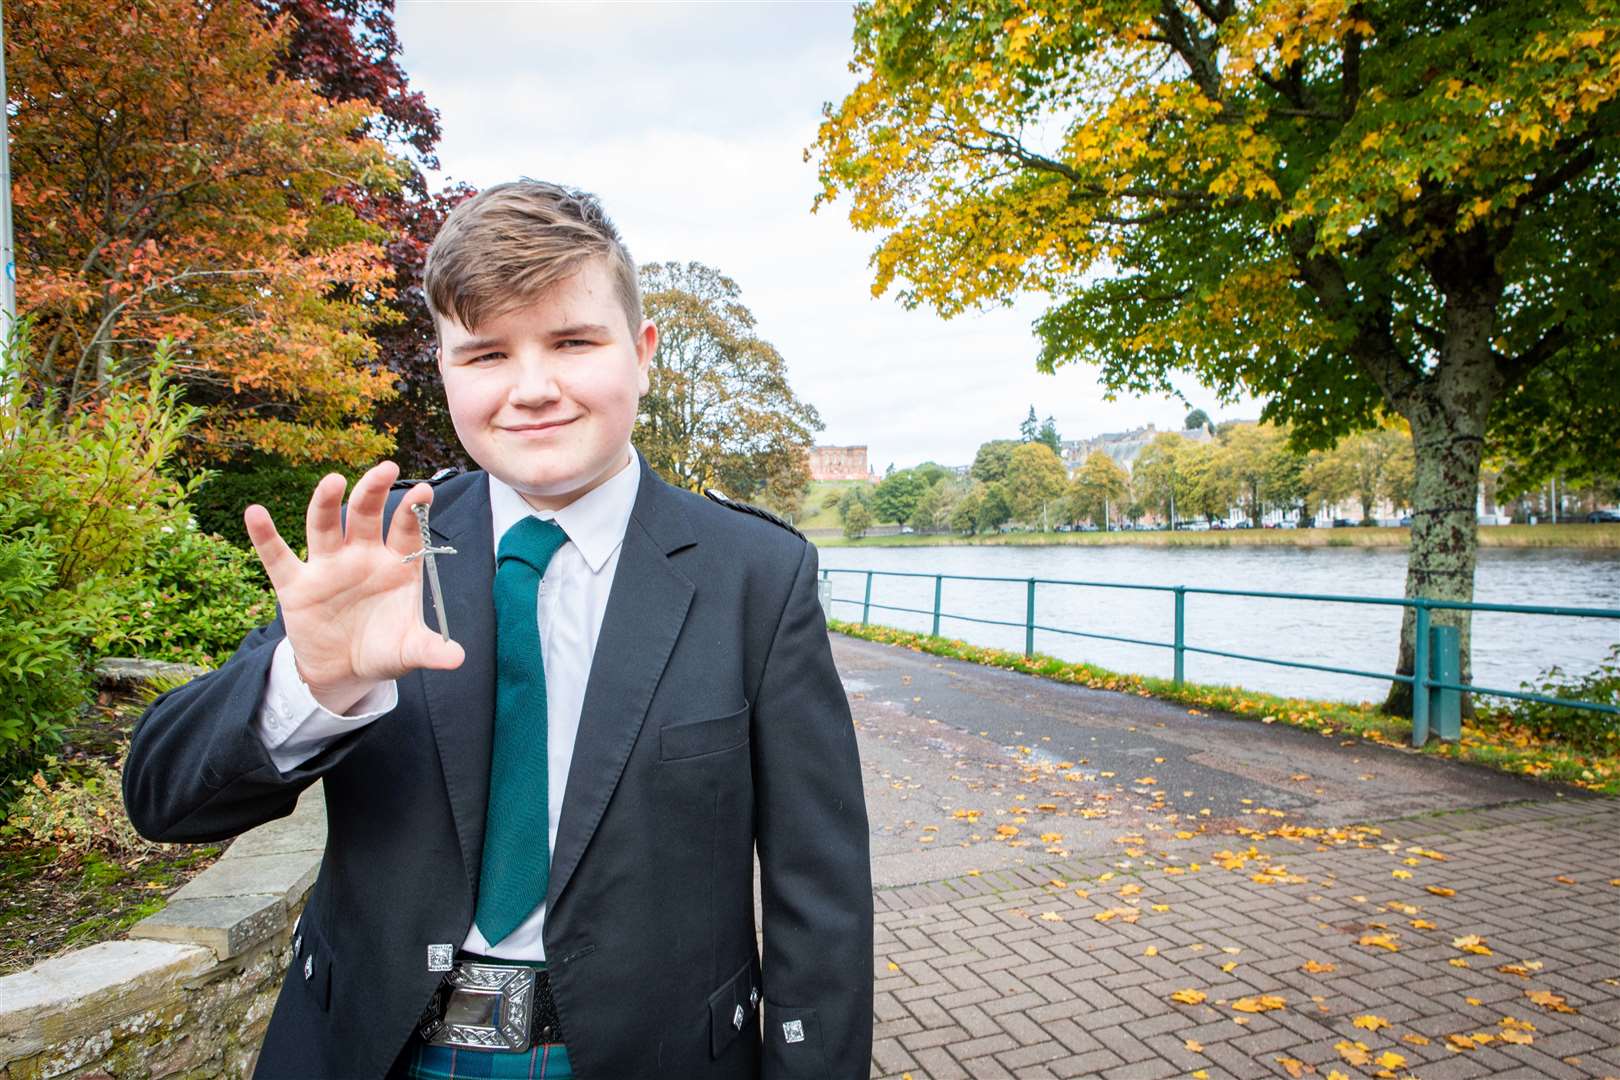 Innes John Begg, 15, from the Isle of Lewis who attends The Nicolson Institute, won the Solo Singing Fluent boys ages 13-15 Traditional Silver Kilt Pin.